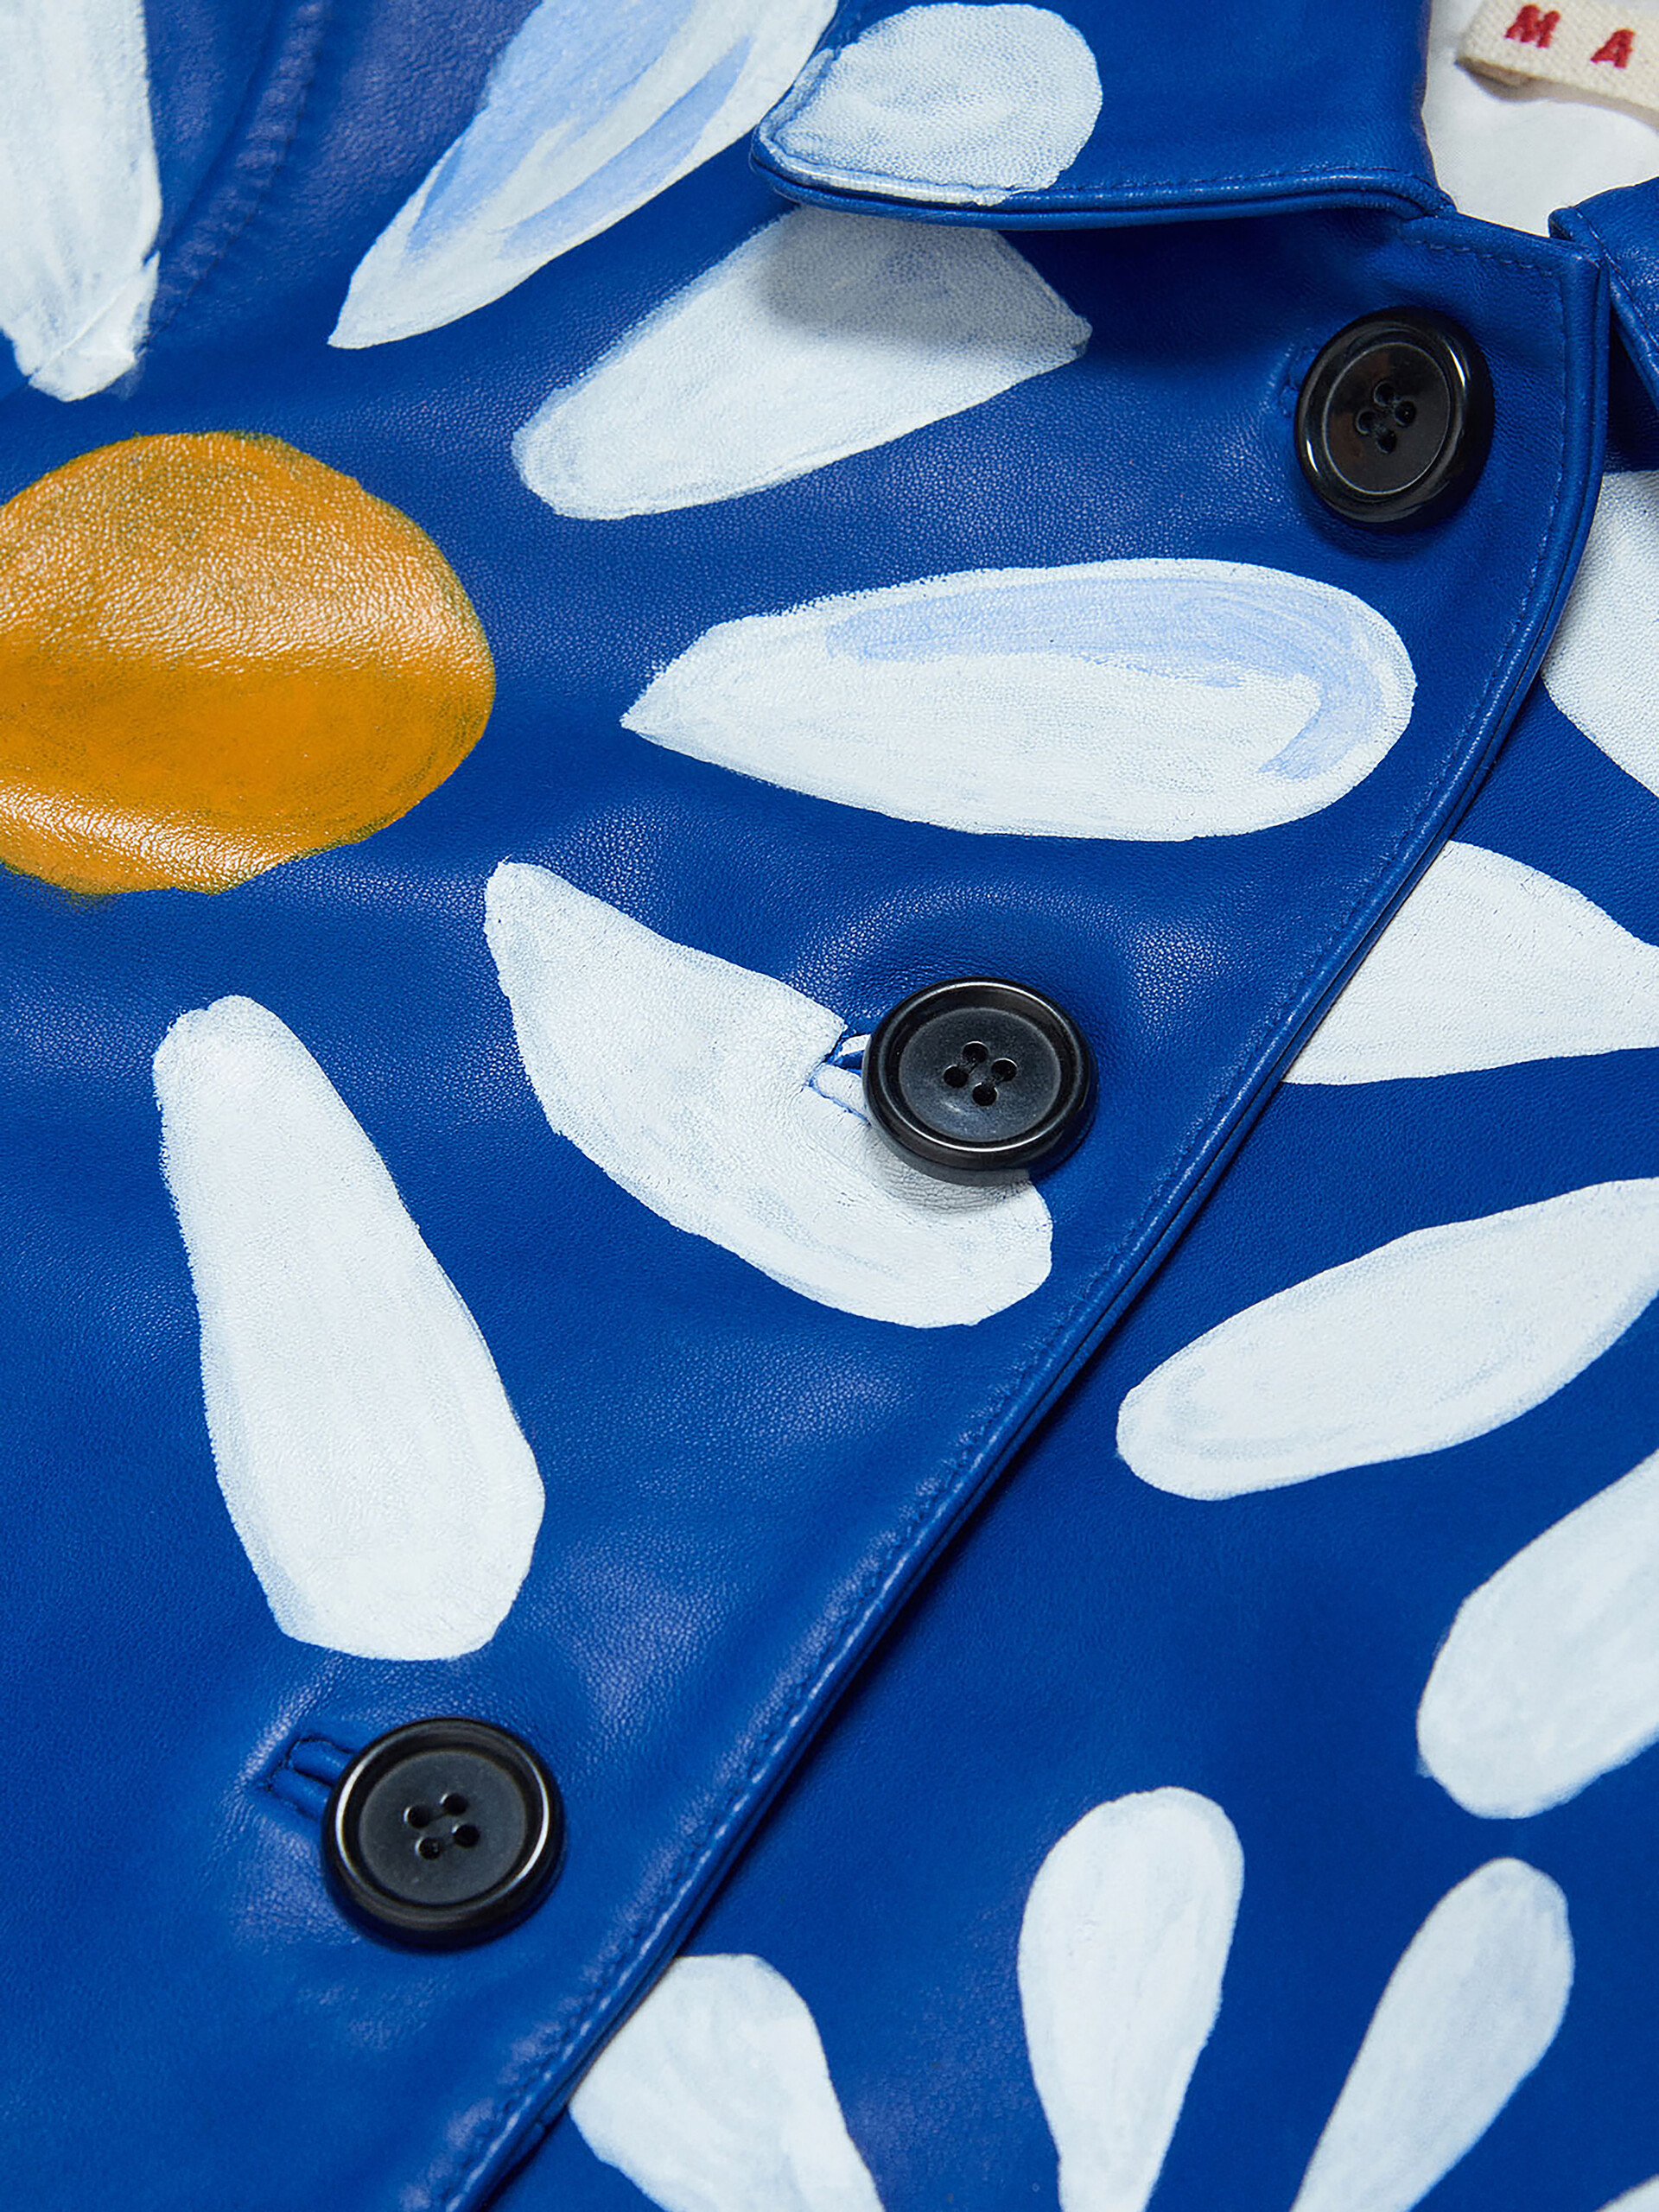 Blue genuine leather jacket with hand-painted Daisy pattern - Jackets - Image 3